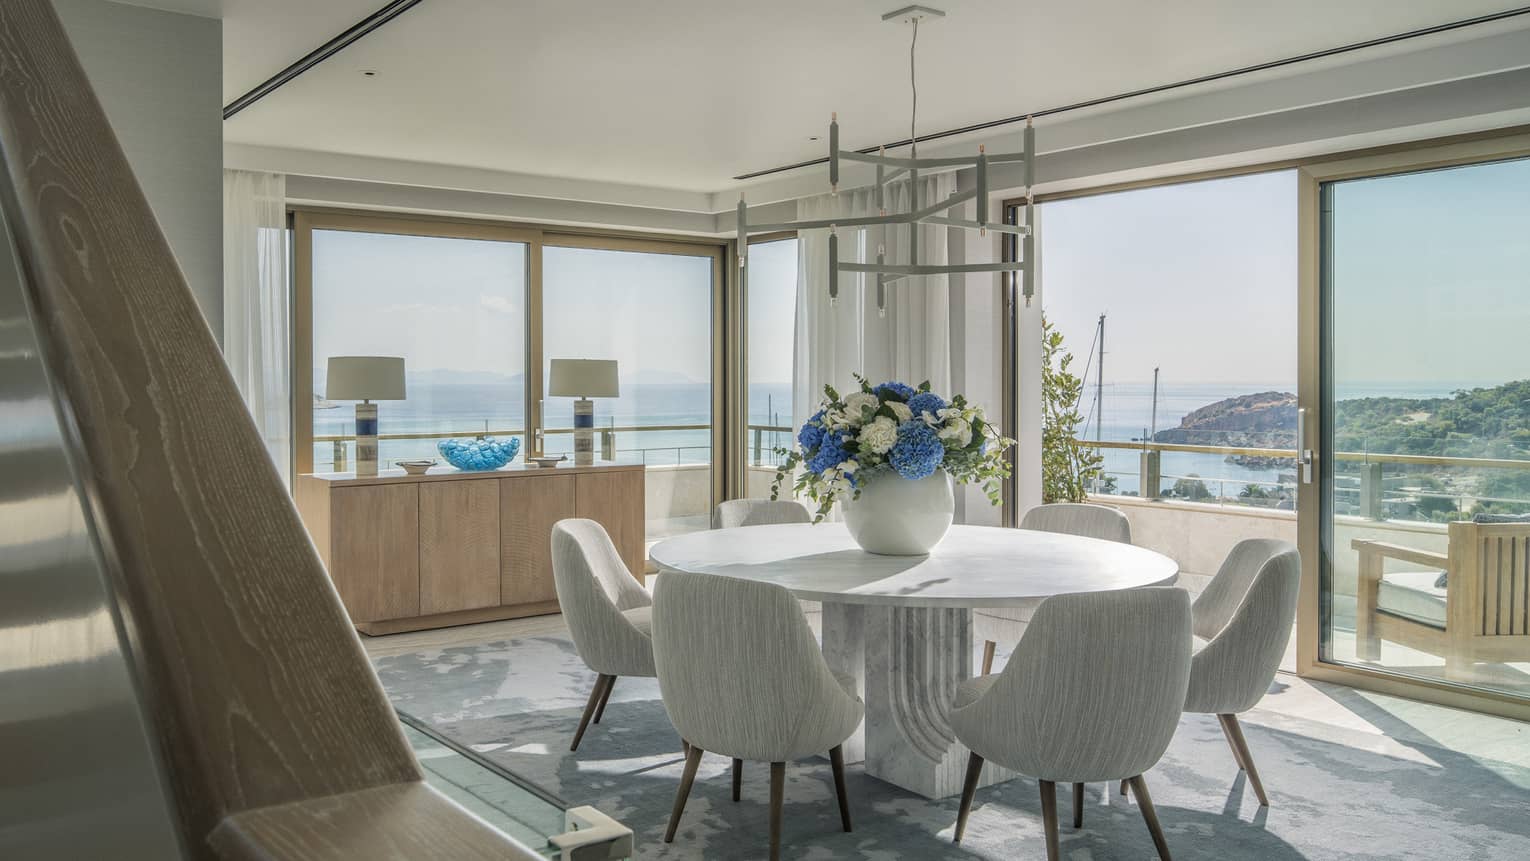 Arion Riviera Suite dining area with round table, white bucket chairs, panoramic ocean views